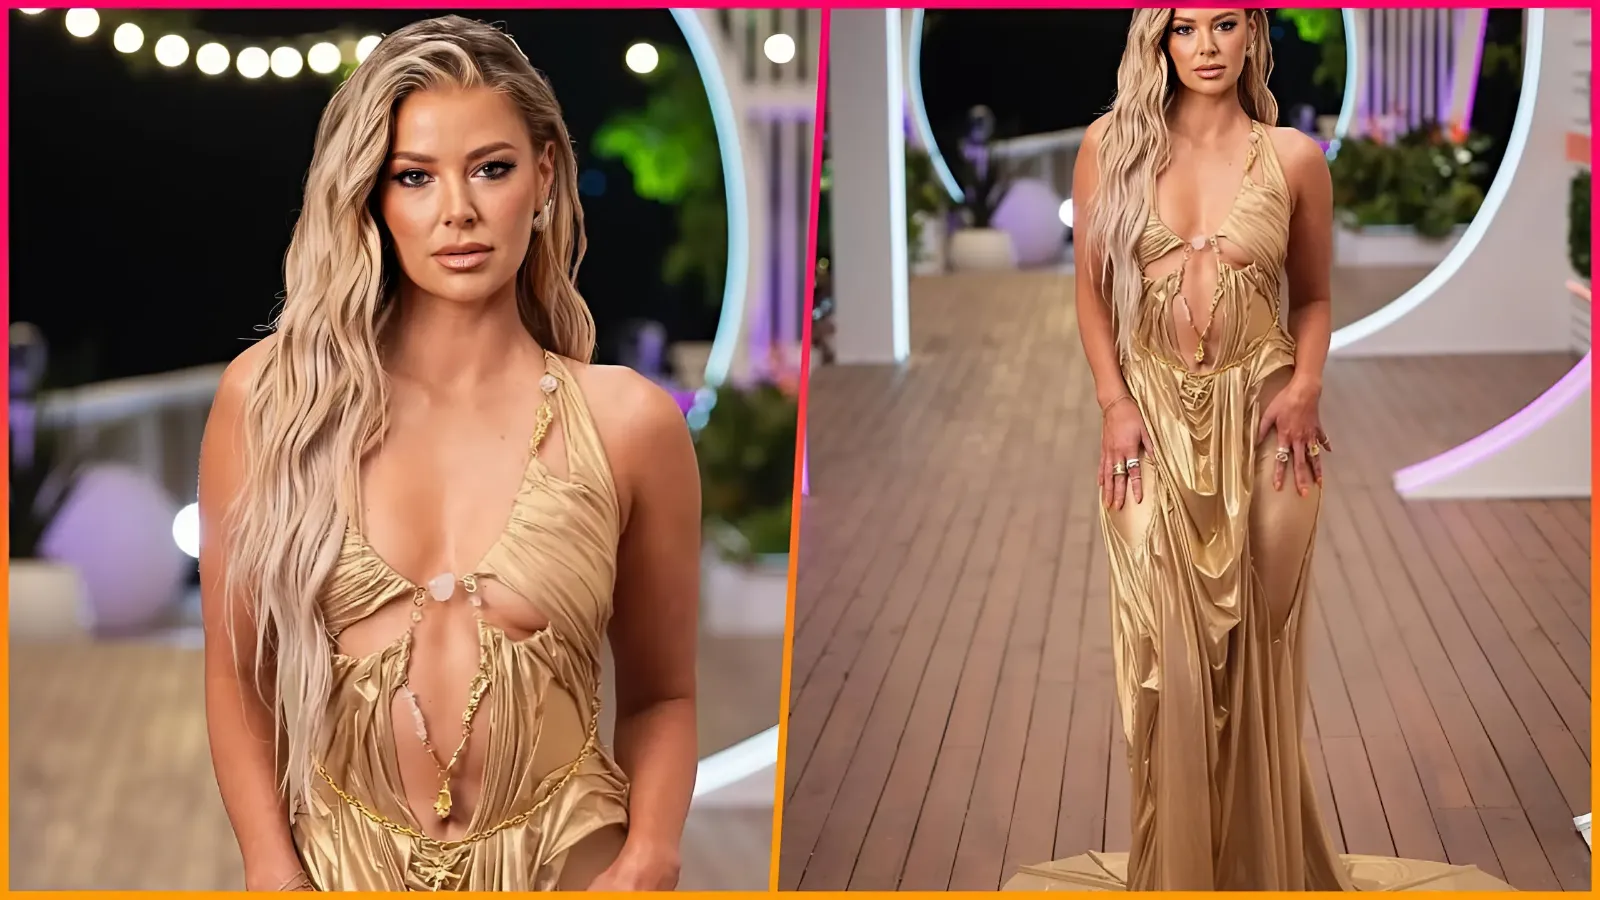 Ariana Madix is dripping in gold gown for ‘Love Island USA’ hosting debut